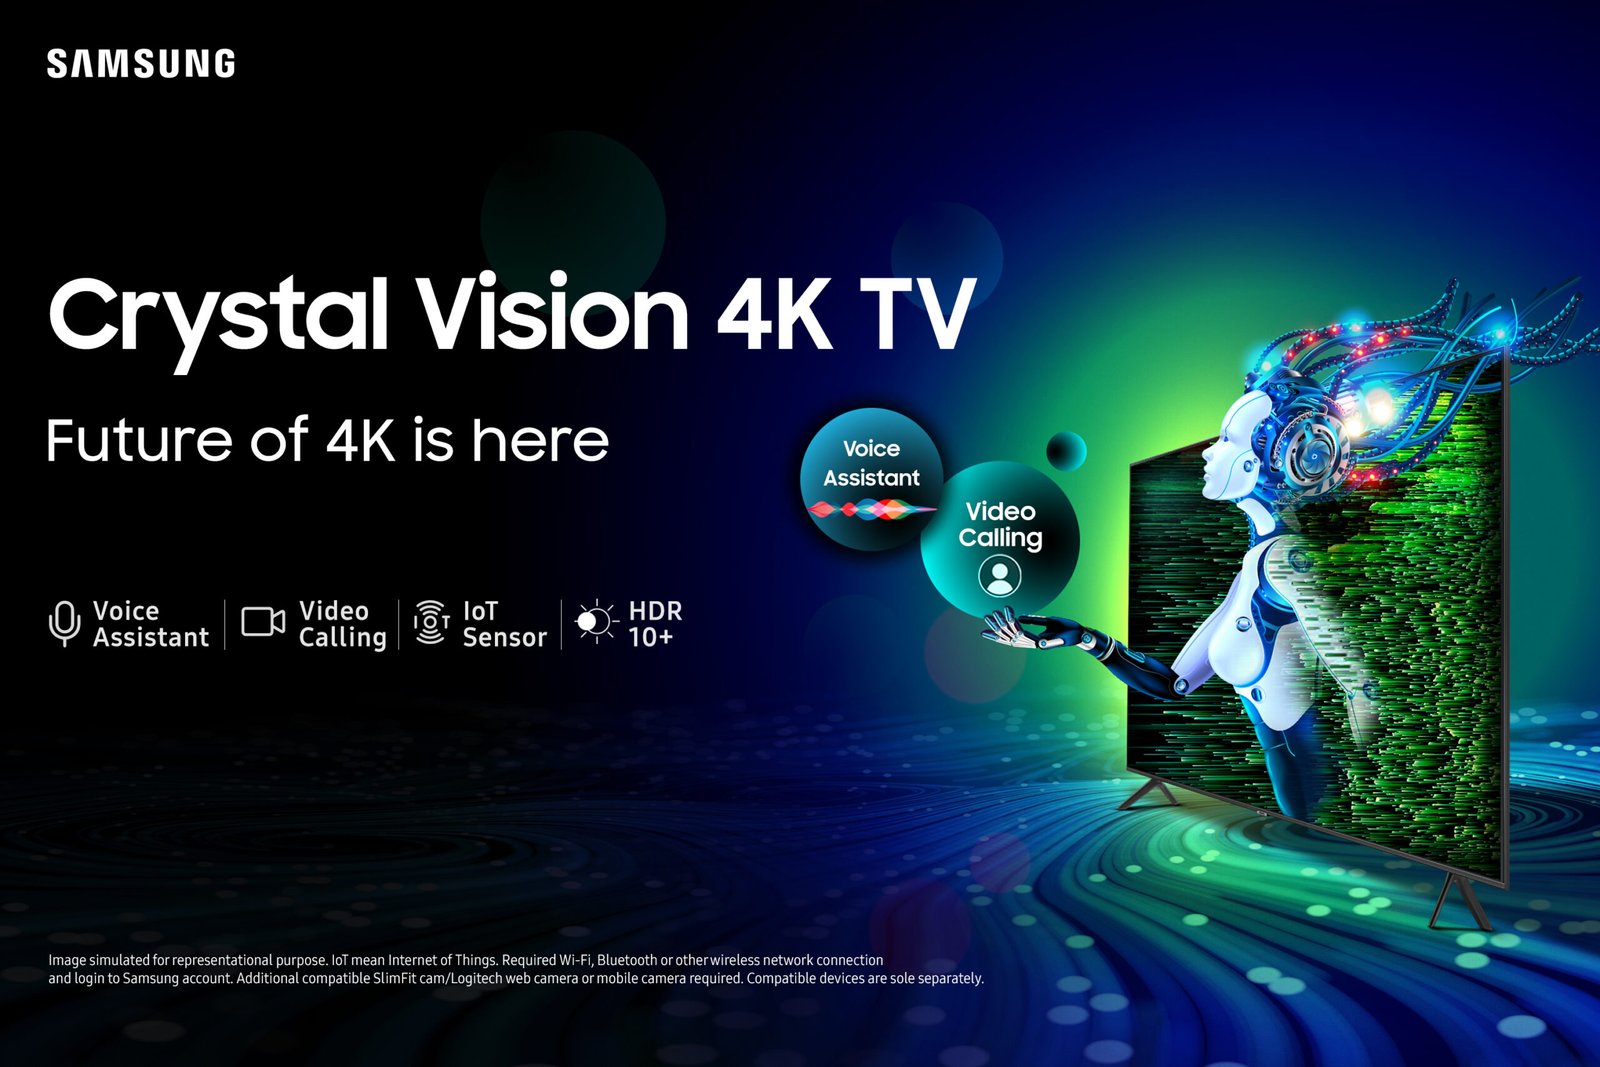 Samsung Launches Crystal Vision 4K UHD TV with Multi Voice Assistant, Video Calling & IoT Sensors for a Connected Living Experience